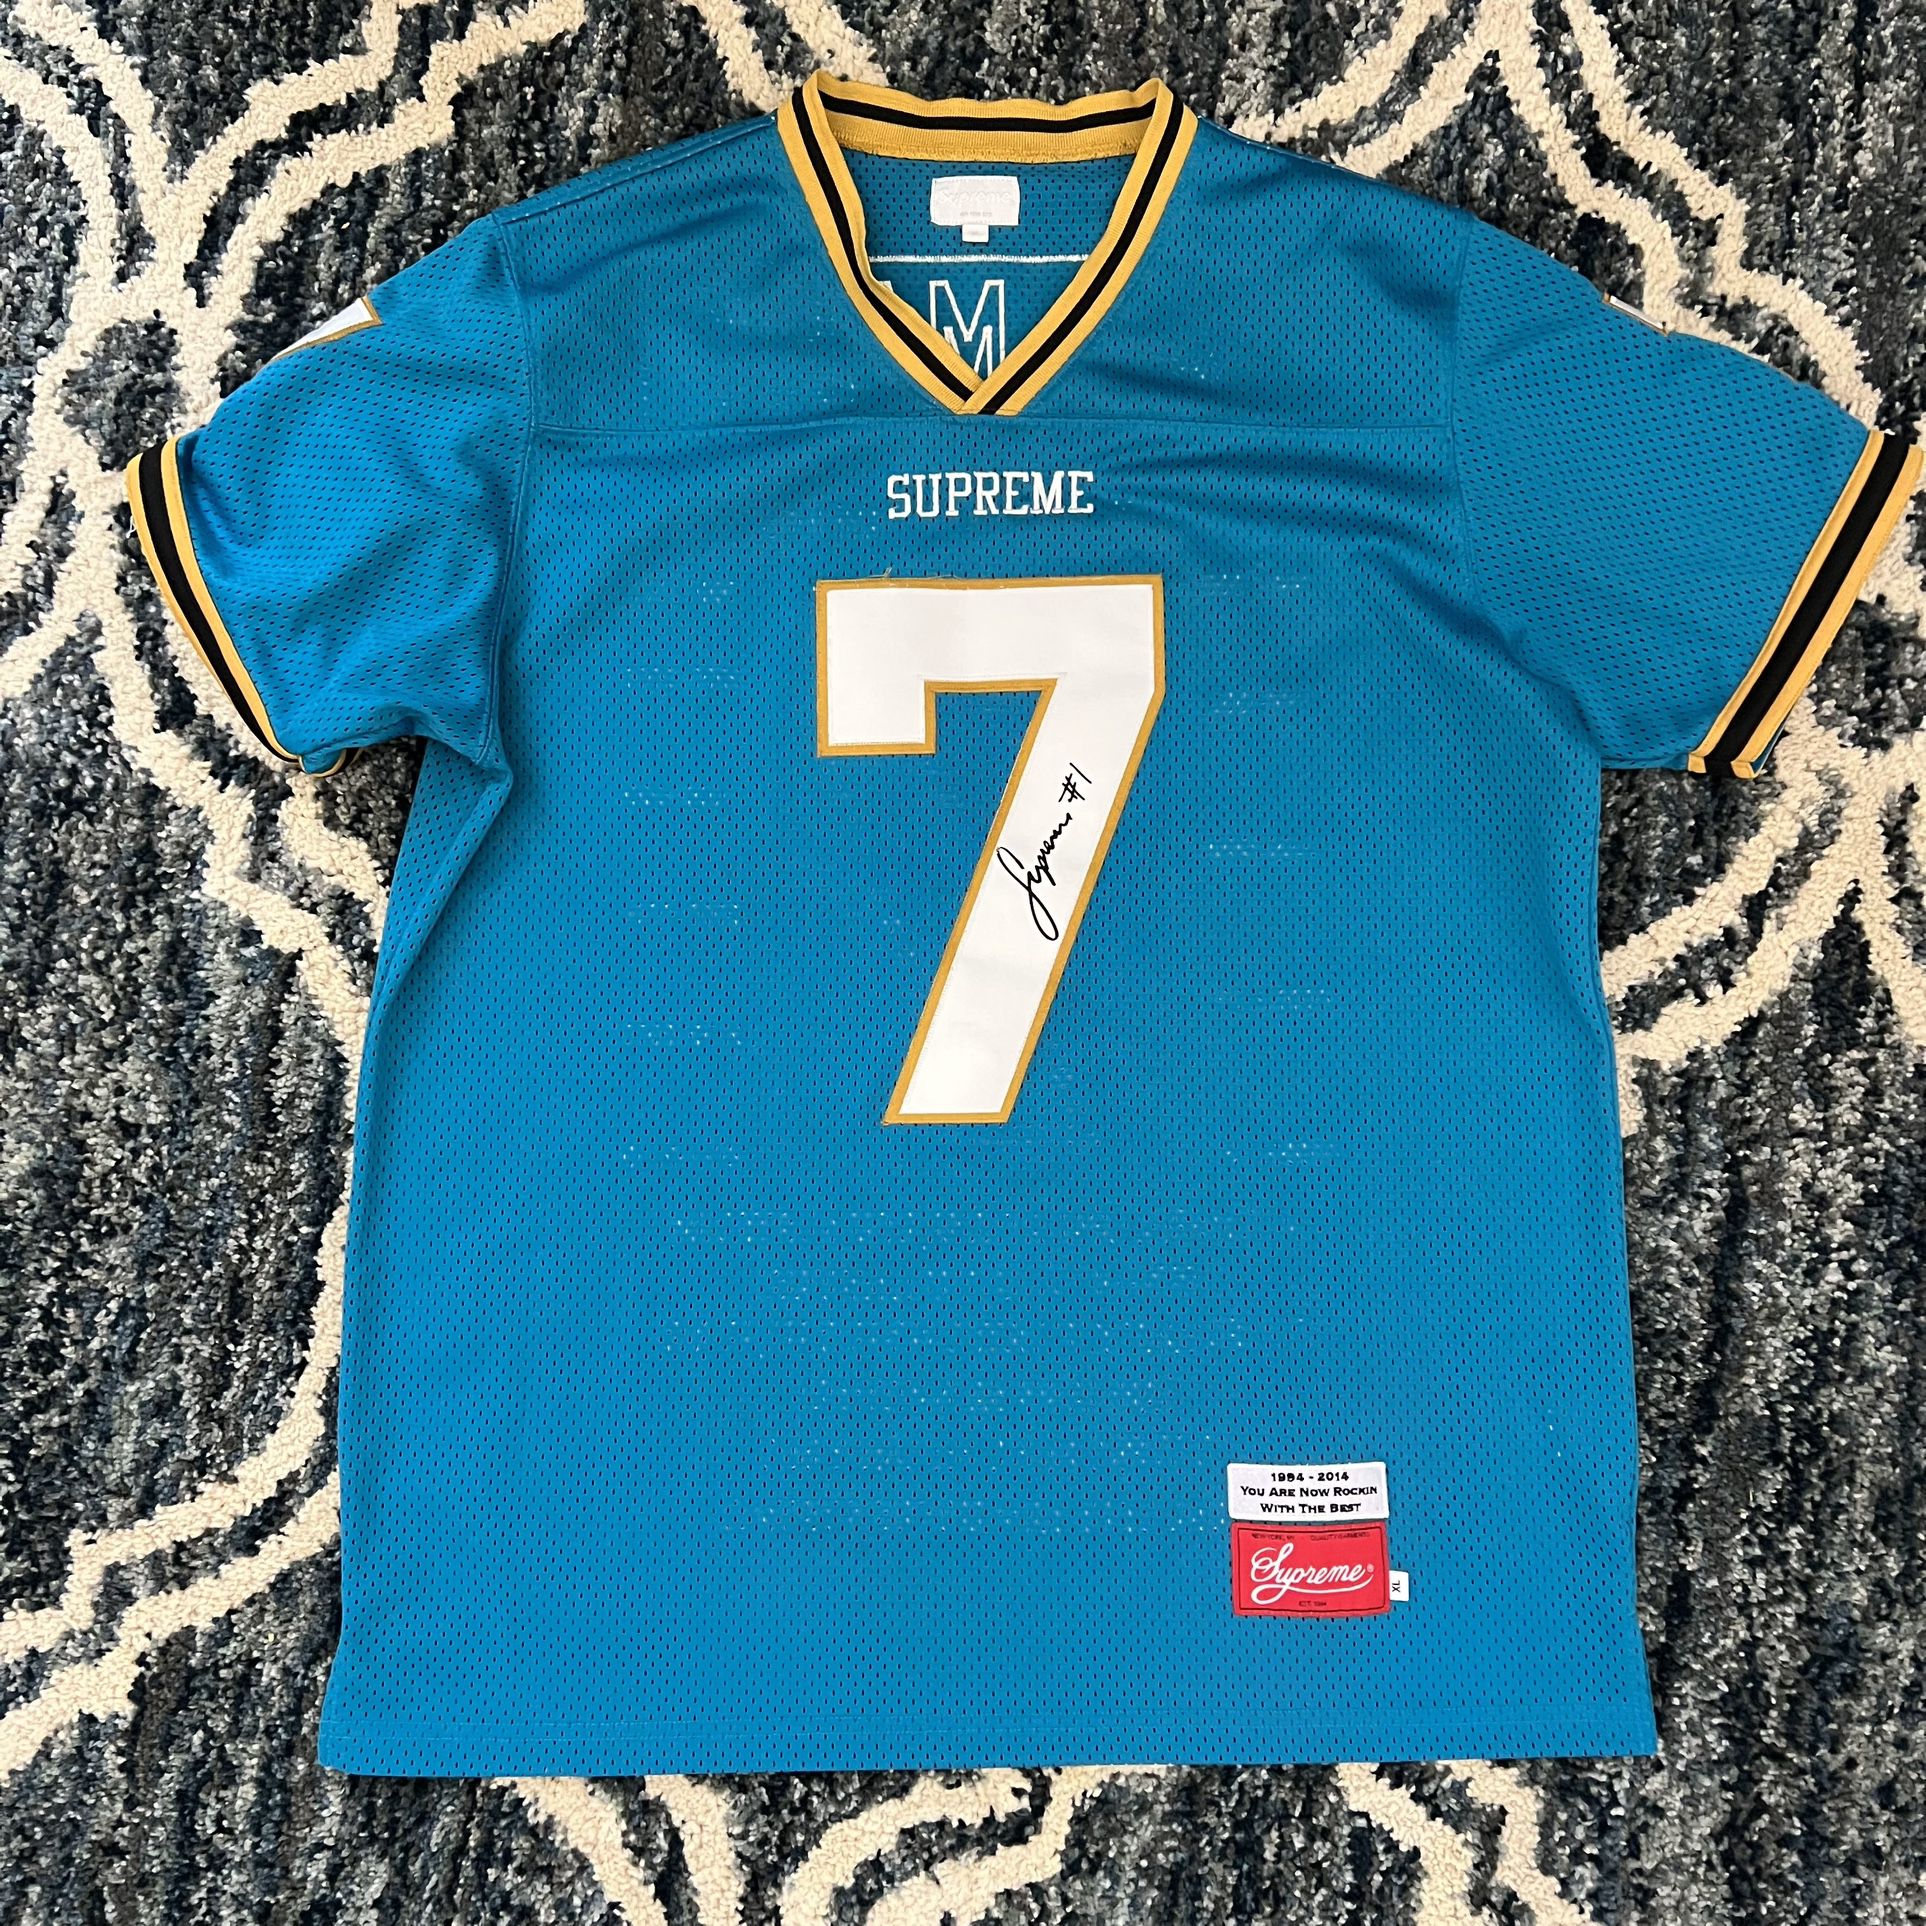 Supreme Hail Mary Teal Jersey